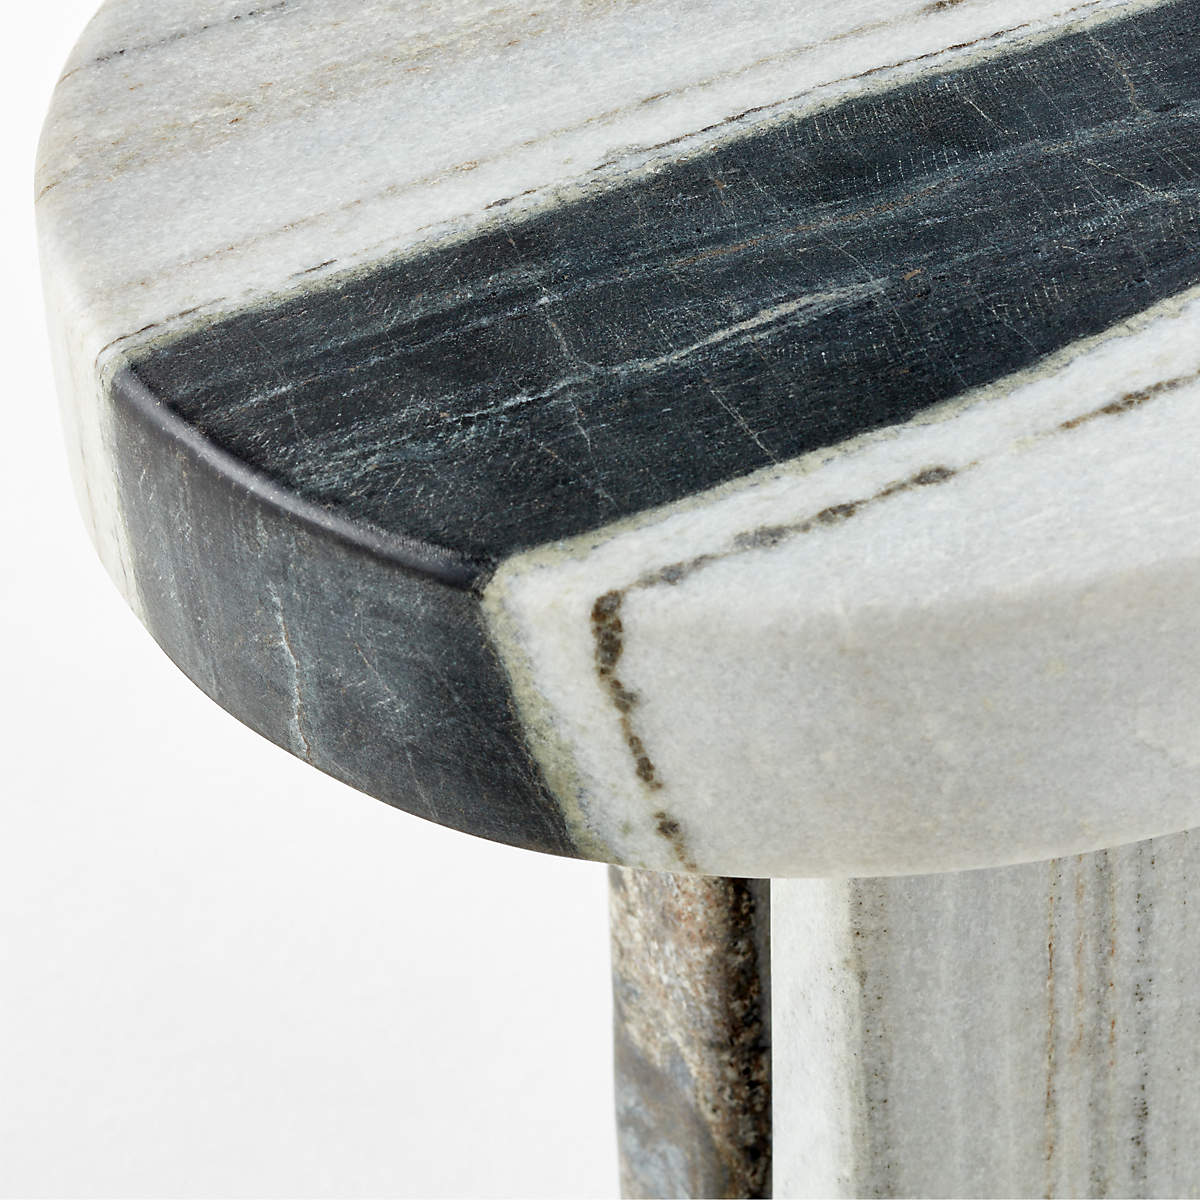 LIVELLO WHITE MARBLE SIDE TABLE